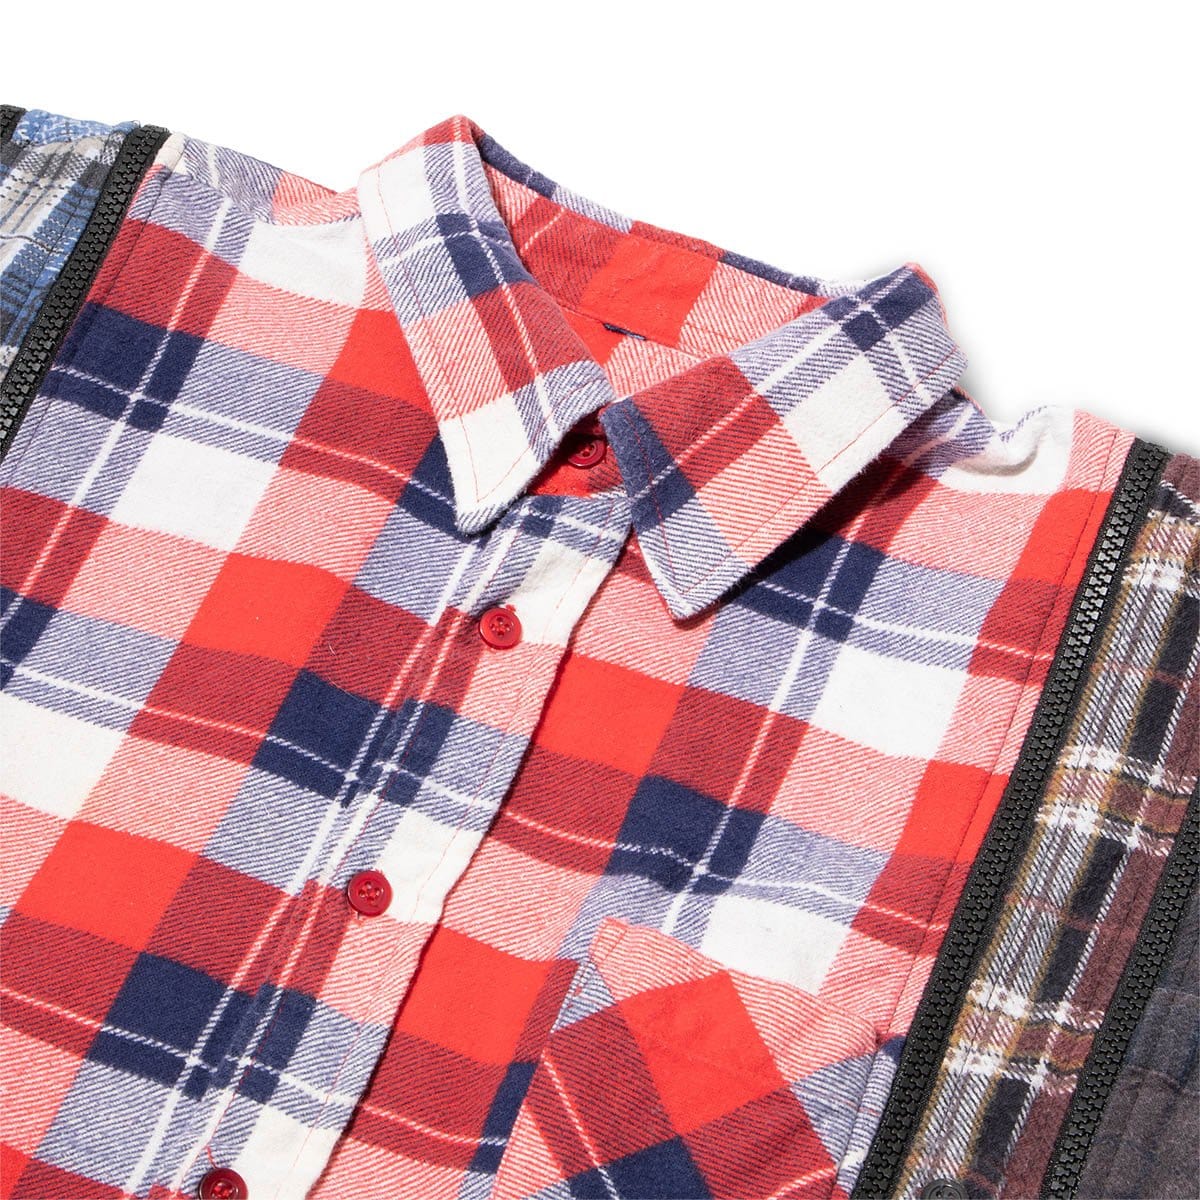 Needles Shirts ASSORTED / O/S 7 CUTS ZIPPED WIDE FLANNEL SHIRT SS21 26